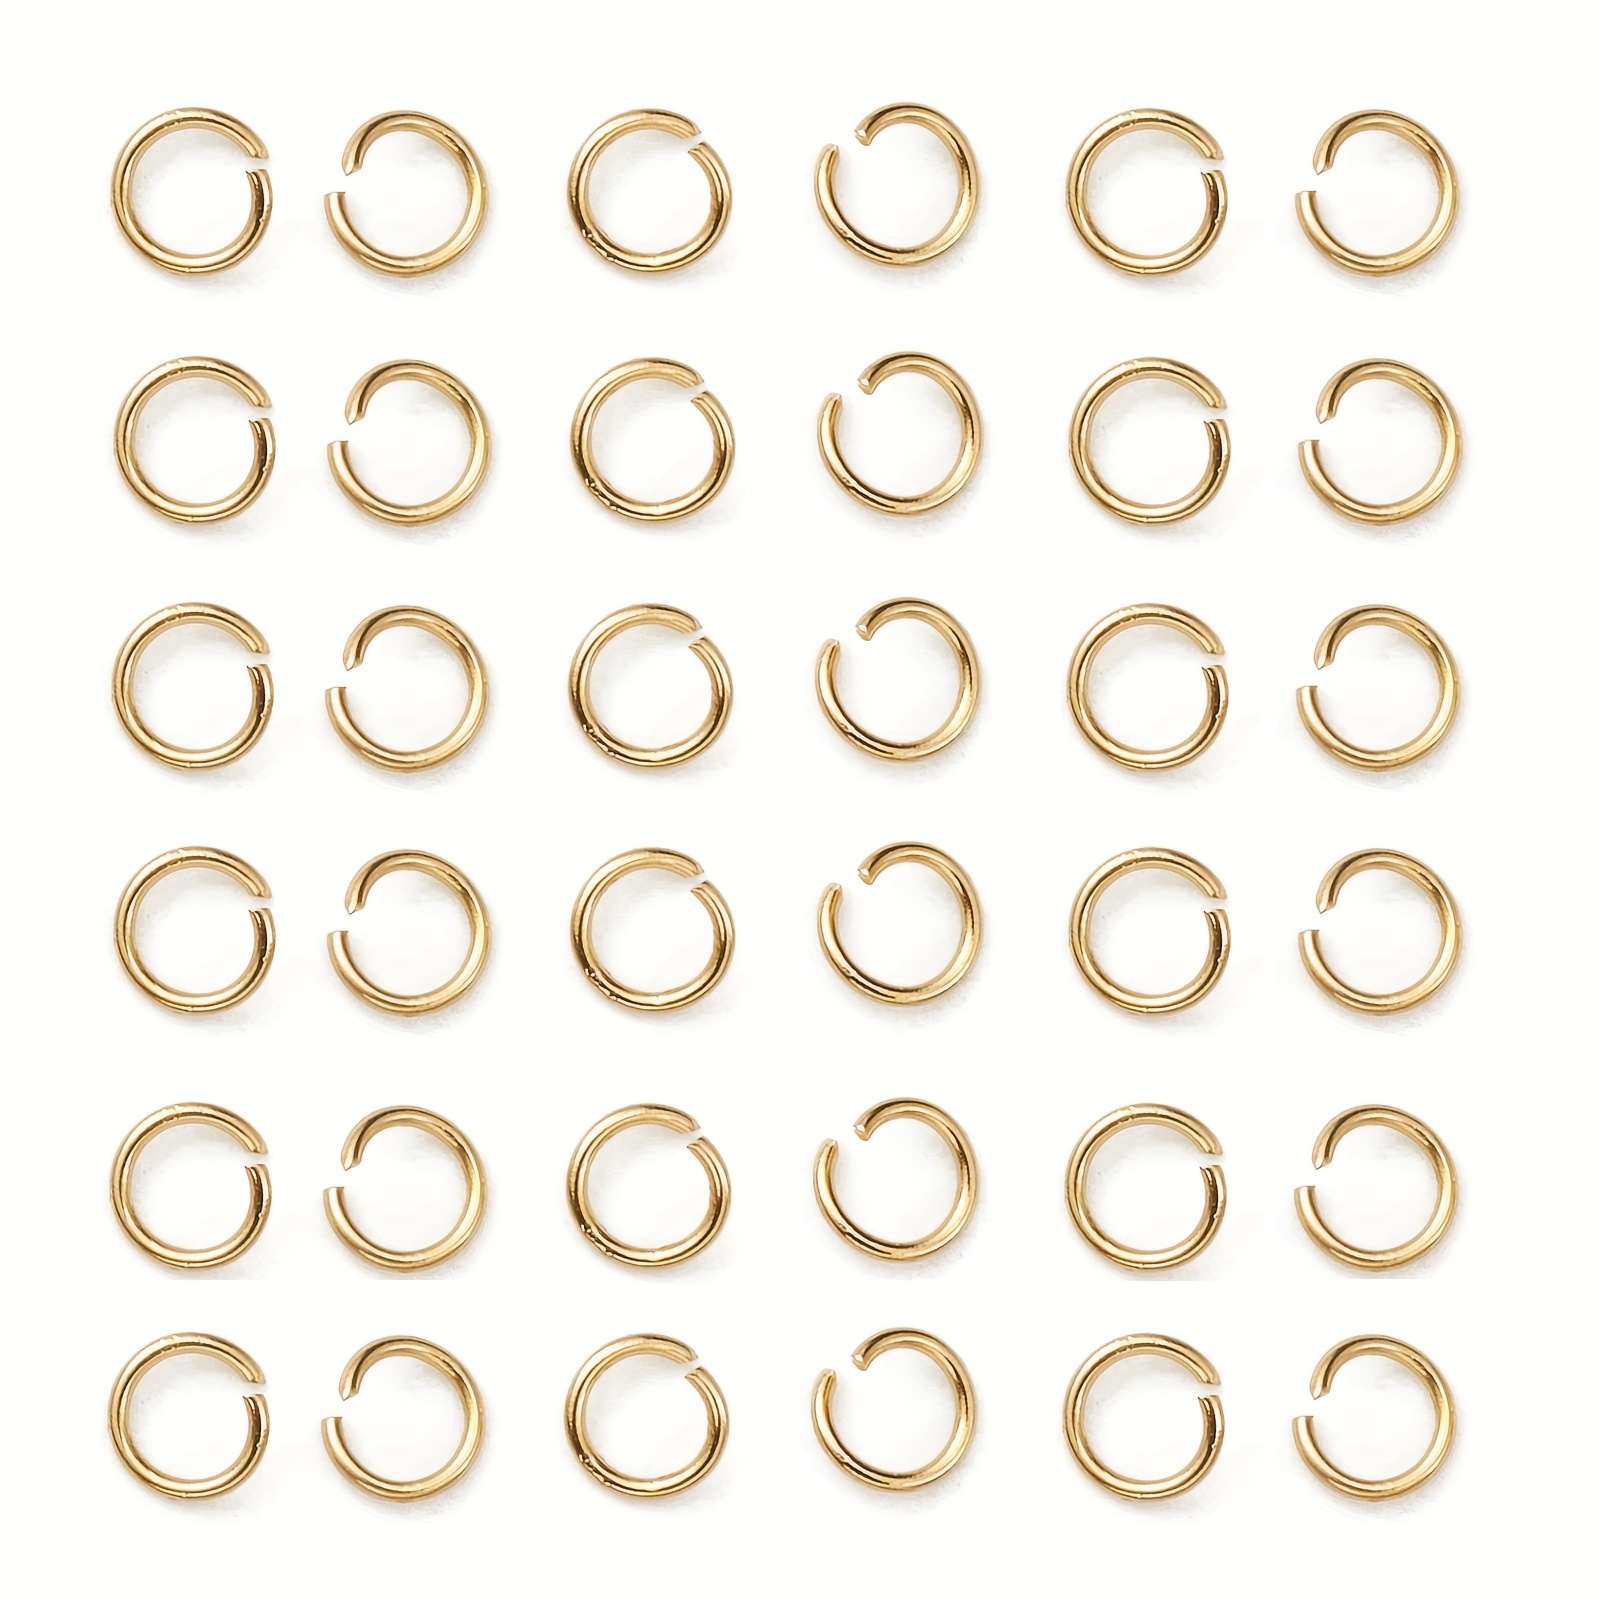 1500pcs Gold Jump Rings for Jewelry Making 4mm Gold Plated Open Jump Rings  for Craft Making Supplies